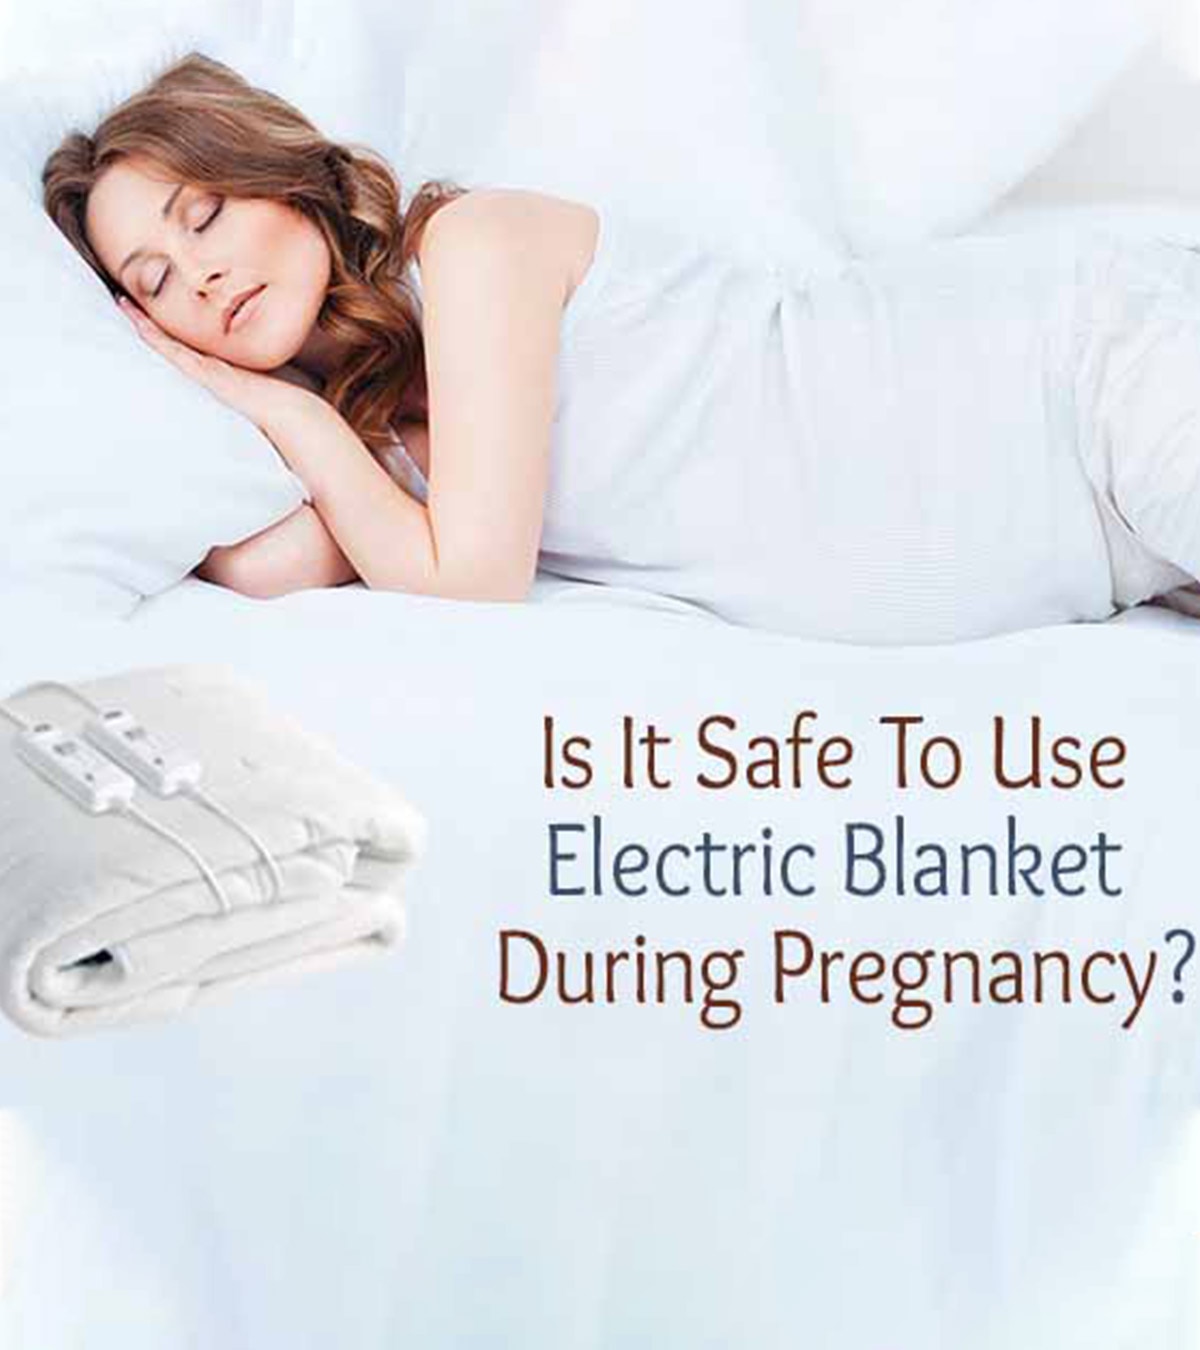 Electric Blanket During Pregnancy: Potential Risks, Tips, And Alternatives